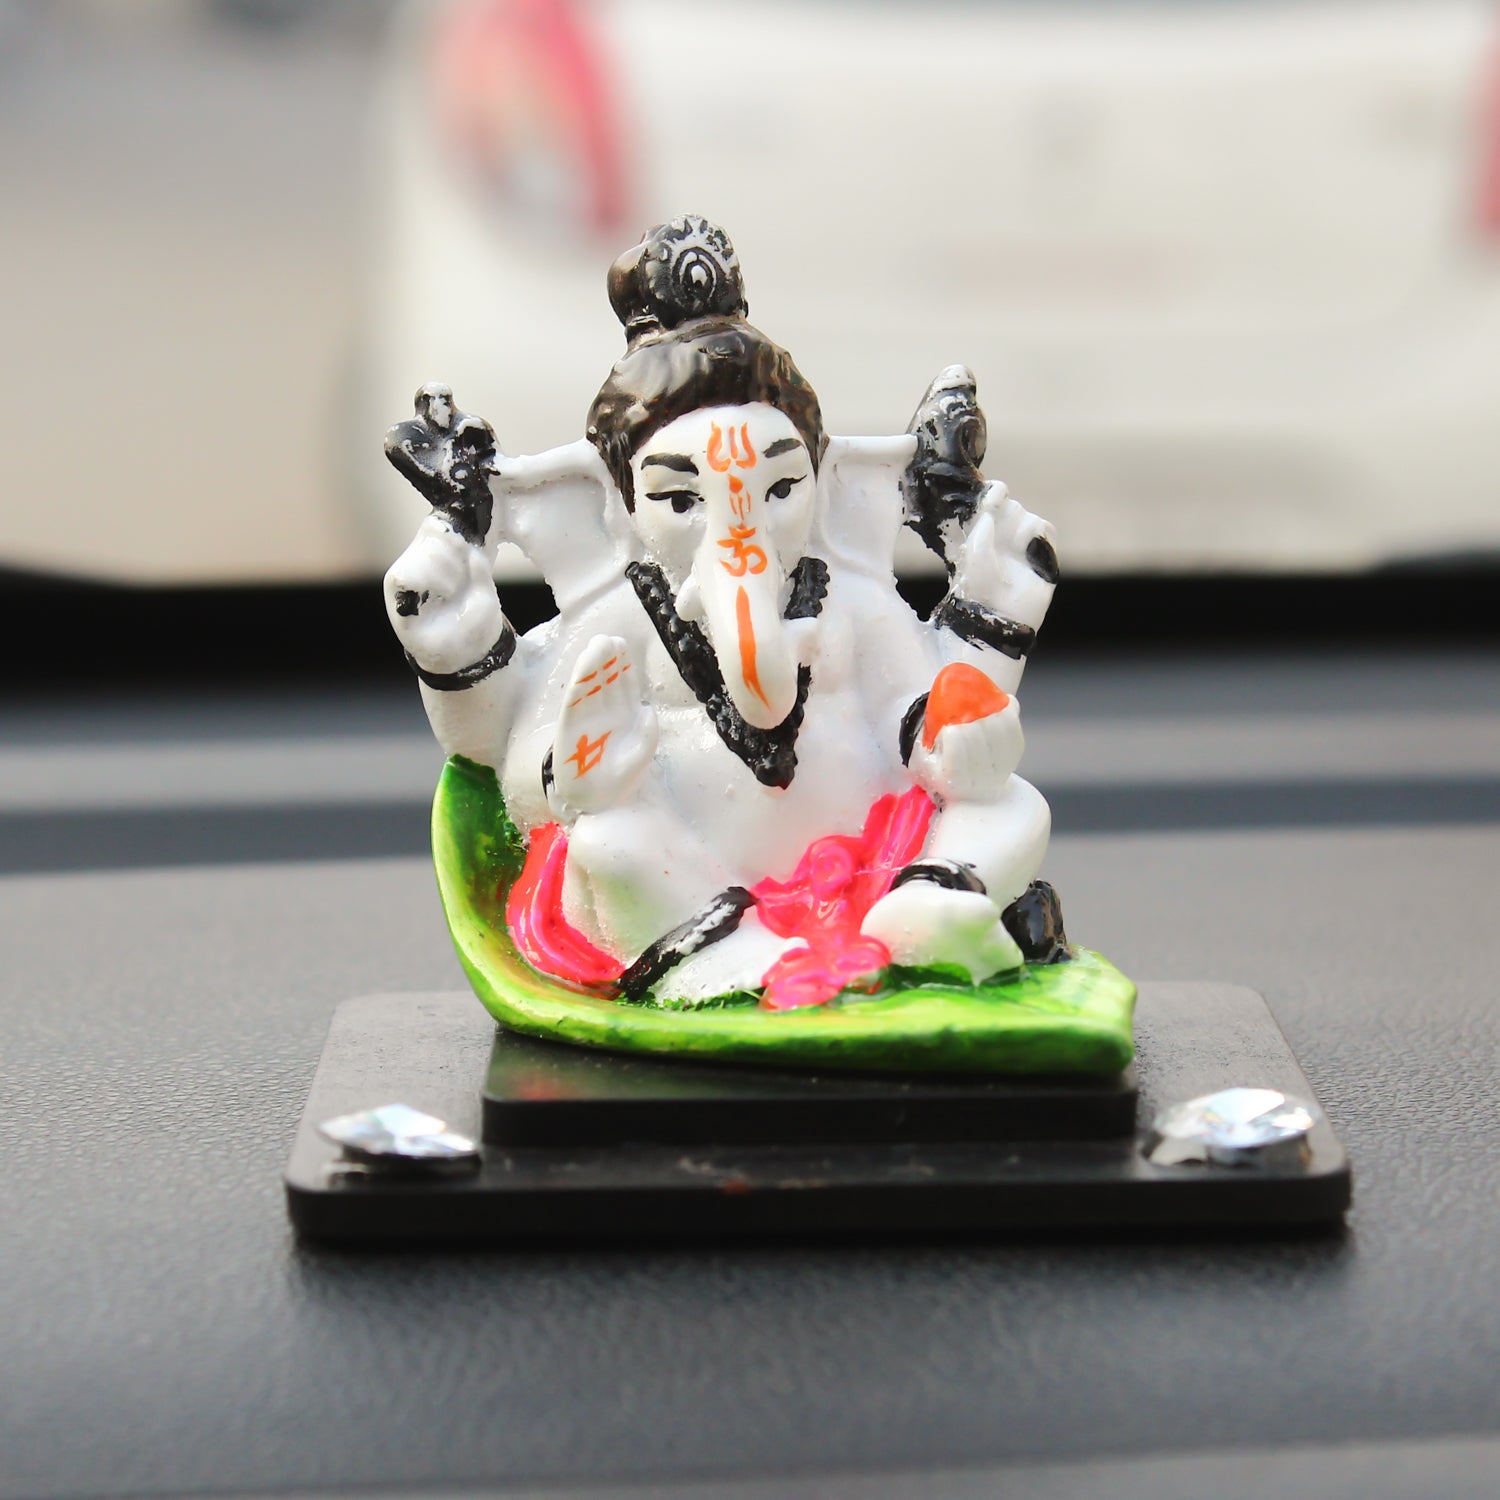 Decorative Lord Ganesha Idol For Car Dashboard, Home Temple, And Office Desks